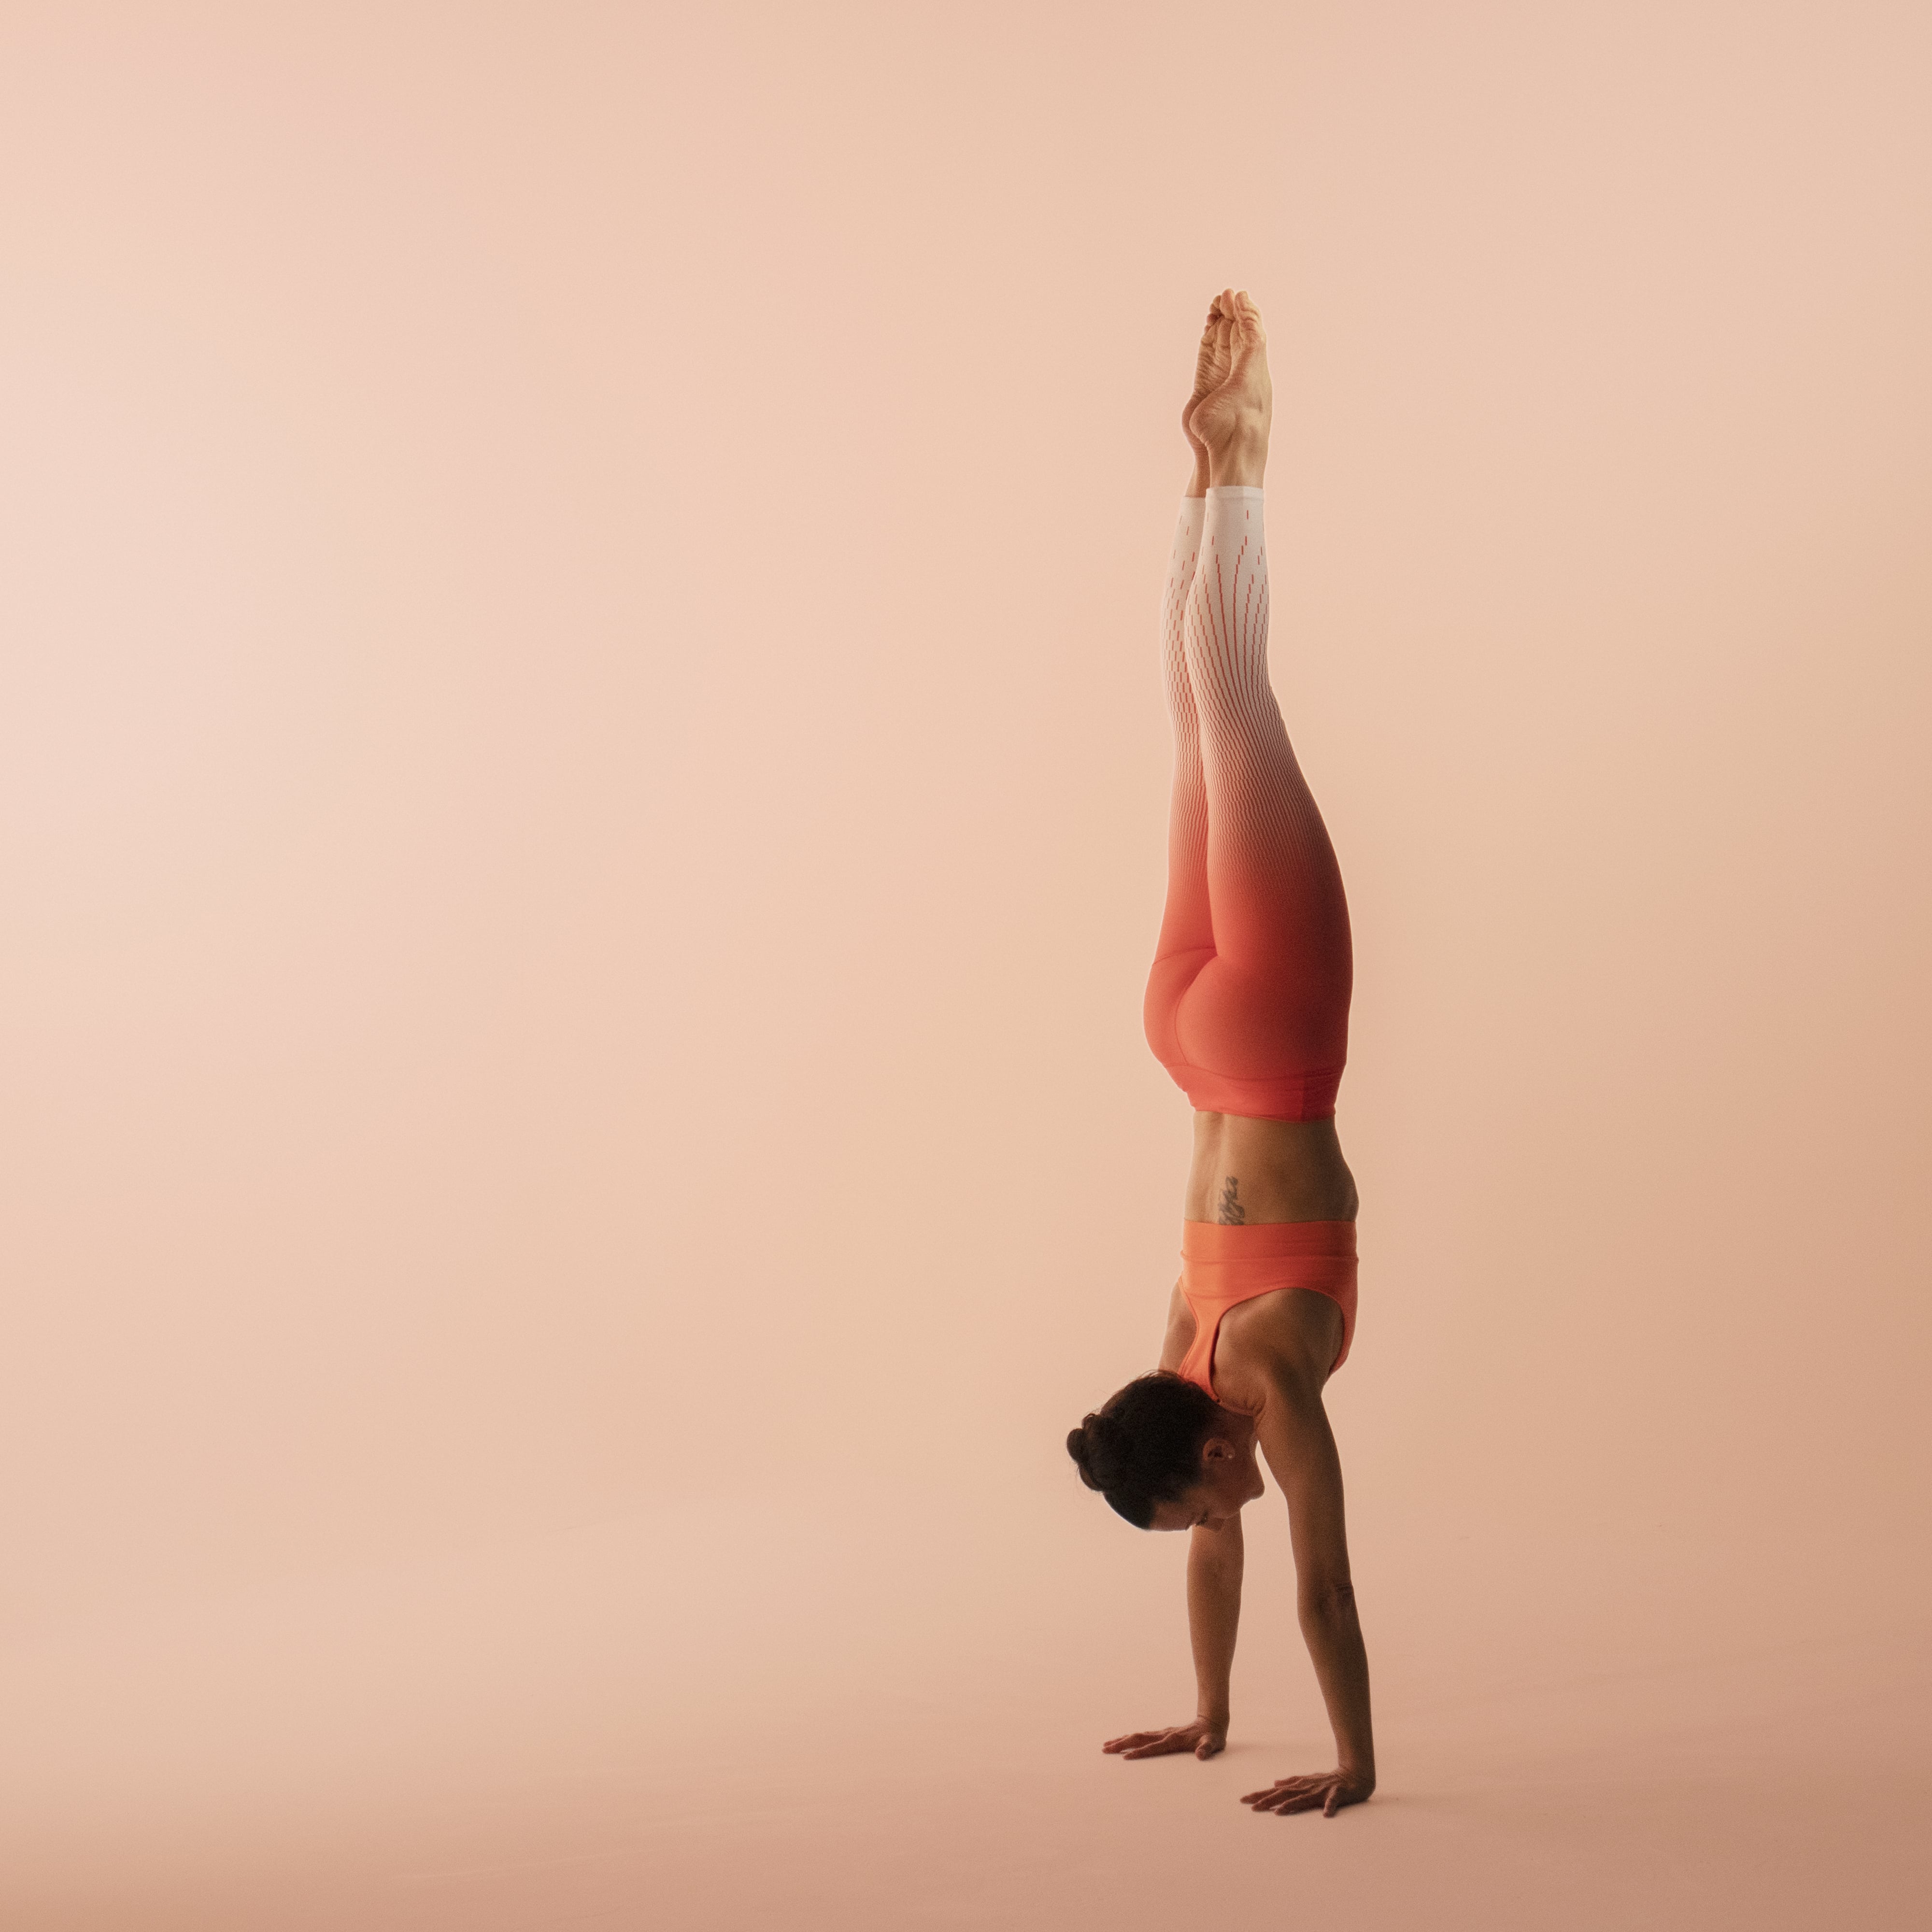 A beginner's guide to headstands